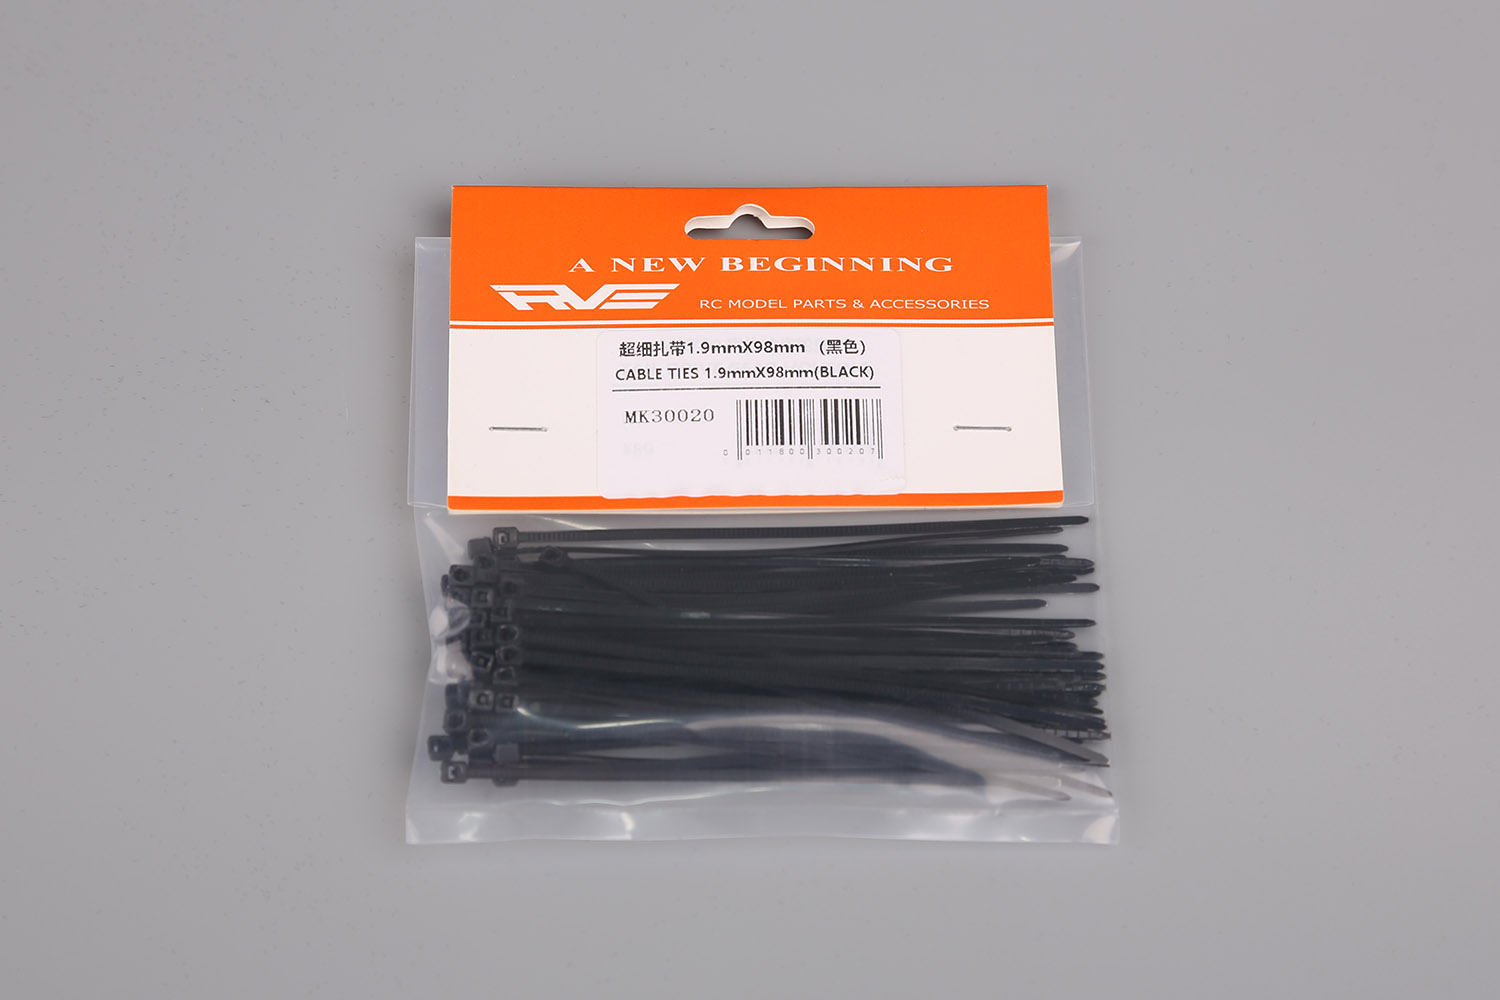 CABLE TIES 1.9mmX98mm(BLACK) MK30020(图1)